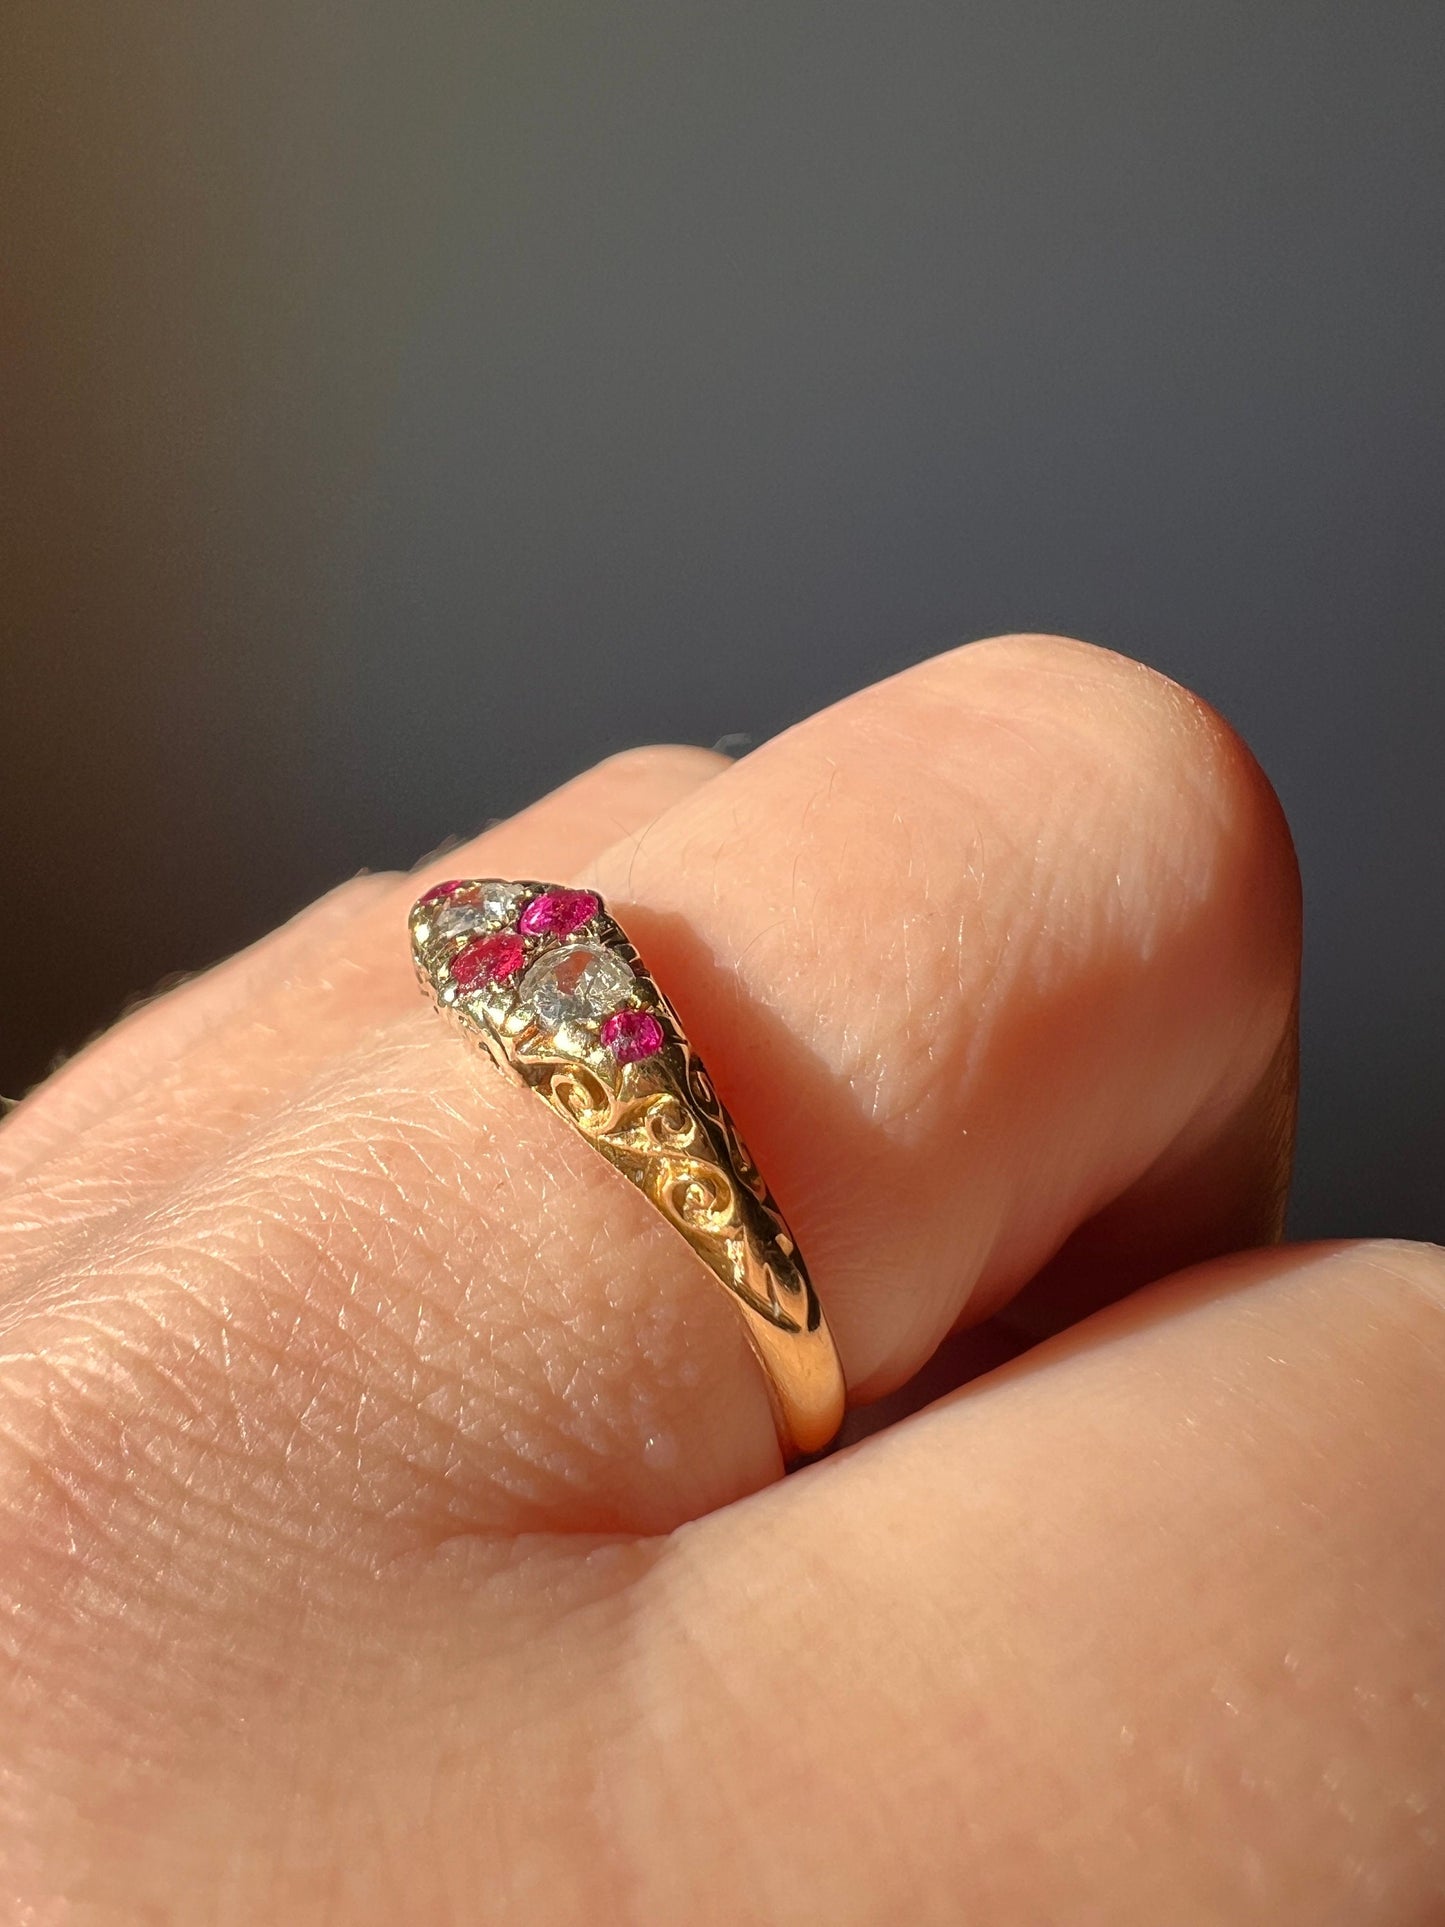 Scrolled Victorian Antique Ruby Old Mine Cut DIAMOND Stacker Band Ring 18k Gold Red Pink Romantic Gift Minimalist Skinny Ornate Kite